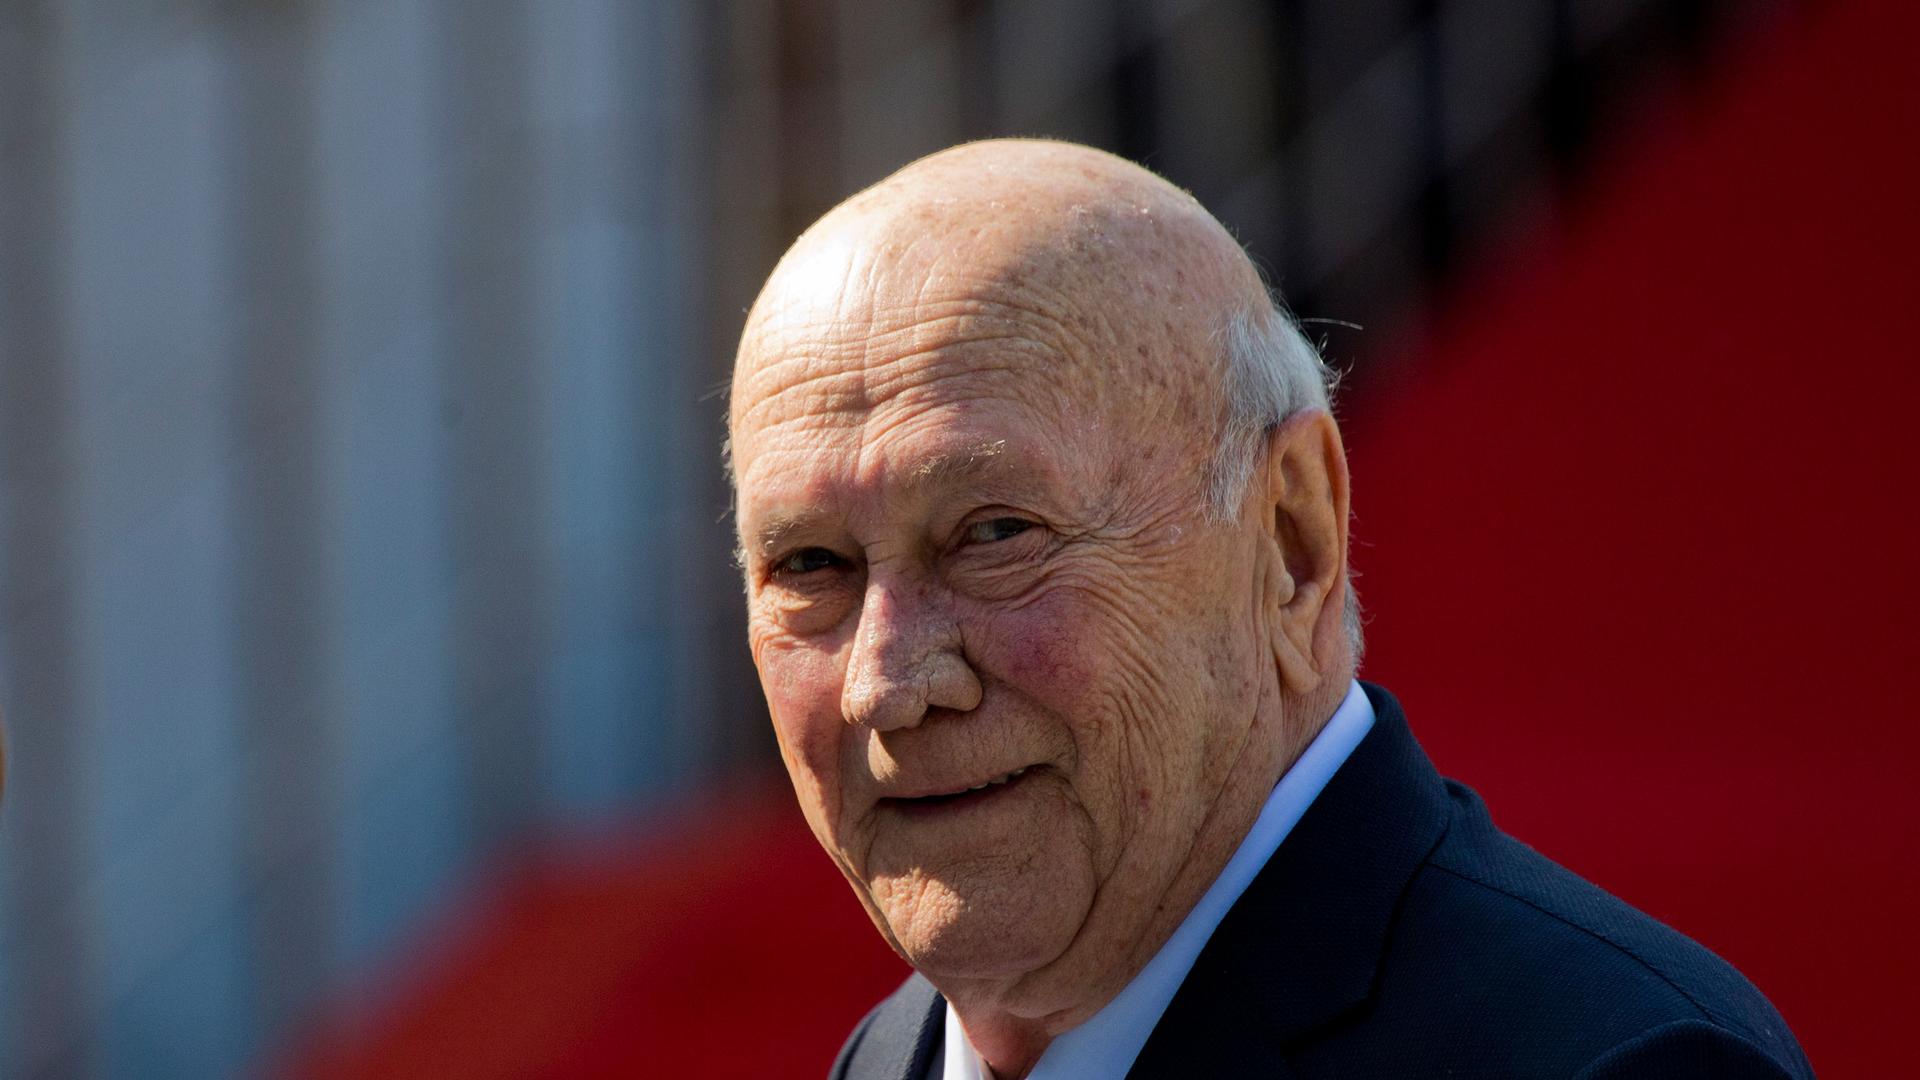 Former South African President FW de Klerk arrives for the swearing-in ceremony of newly elected President Cyril Ramaphosa in Pretoria, South Africa, May 25, 2019. 